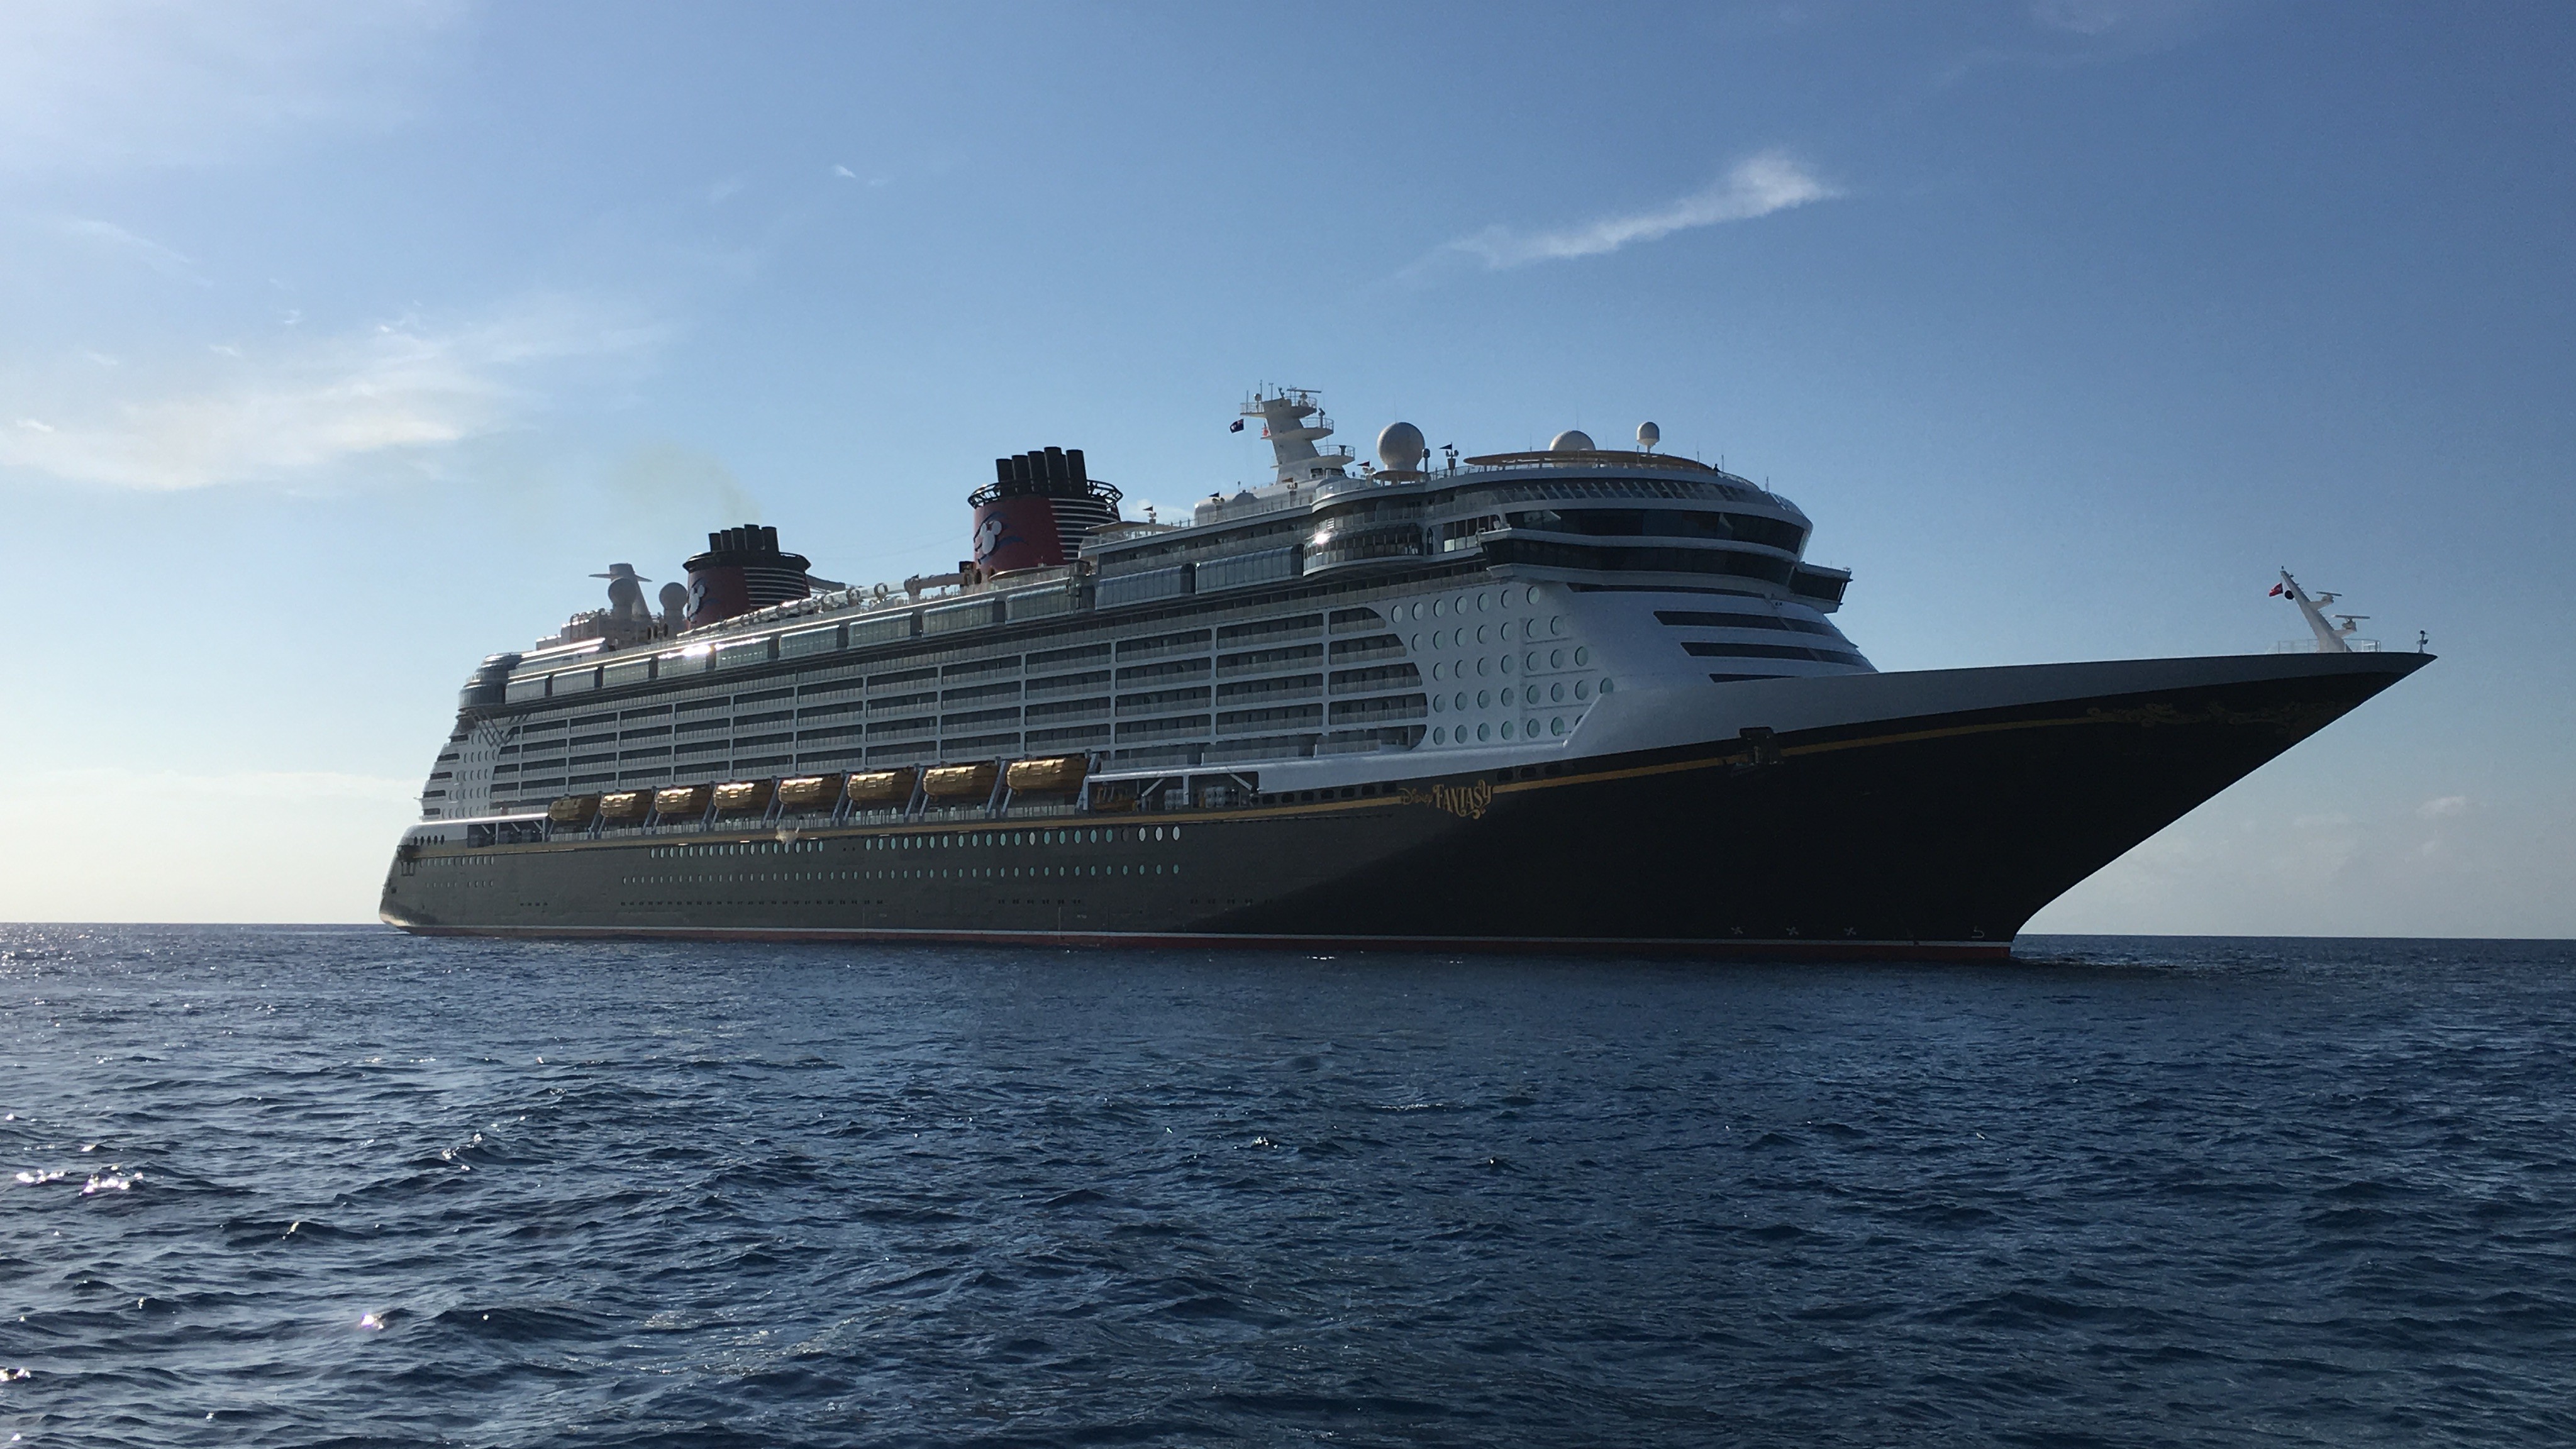 DCL Announces Restart of Disney Fantasy with Major Itinerary Changes